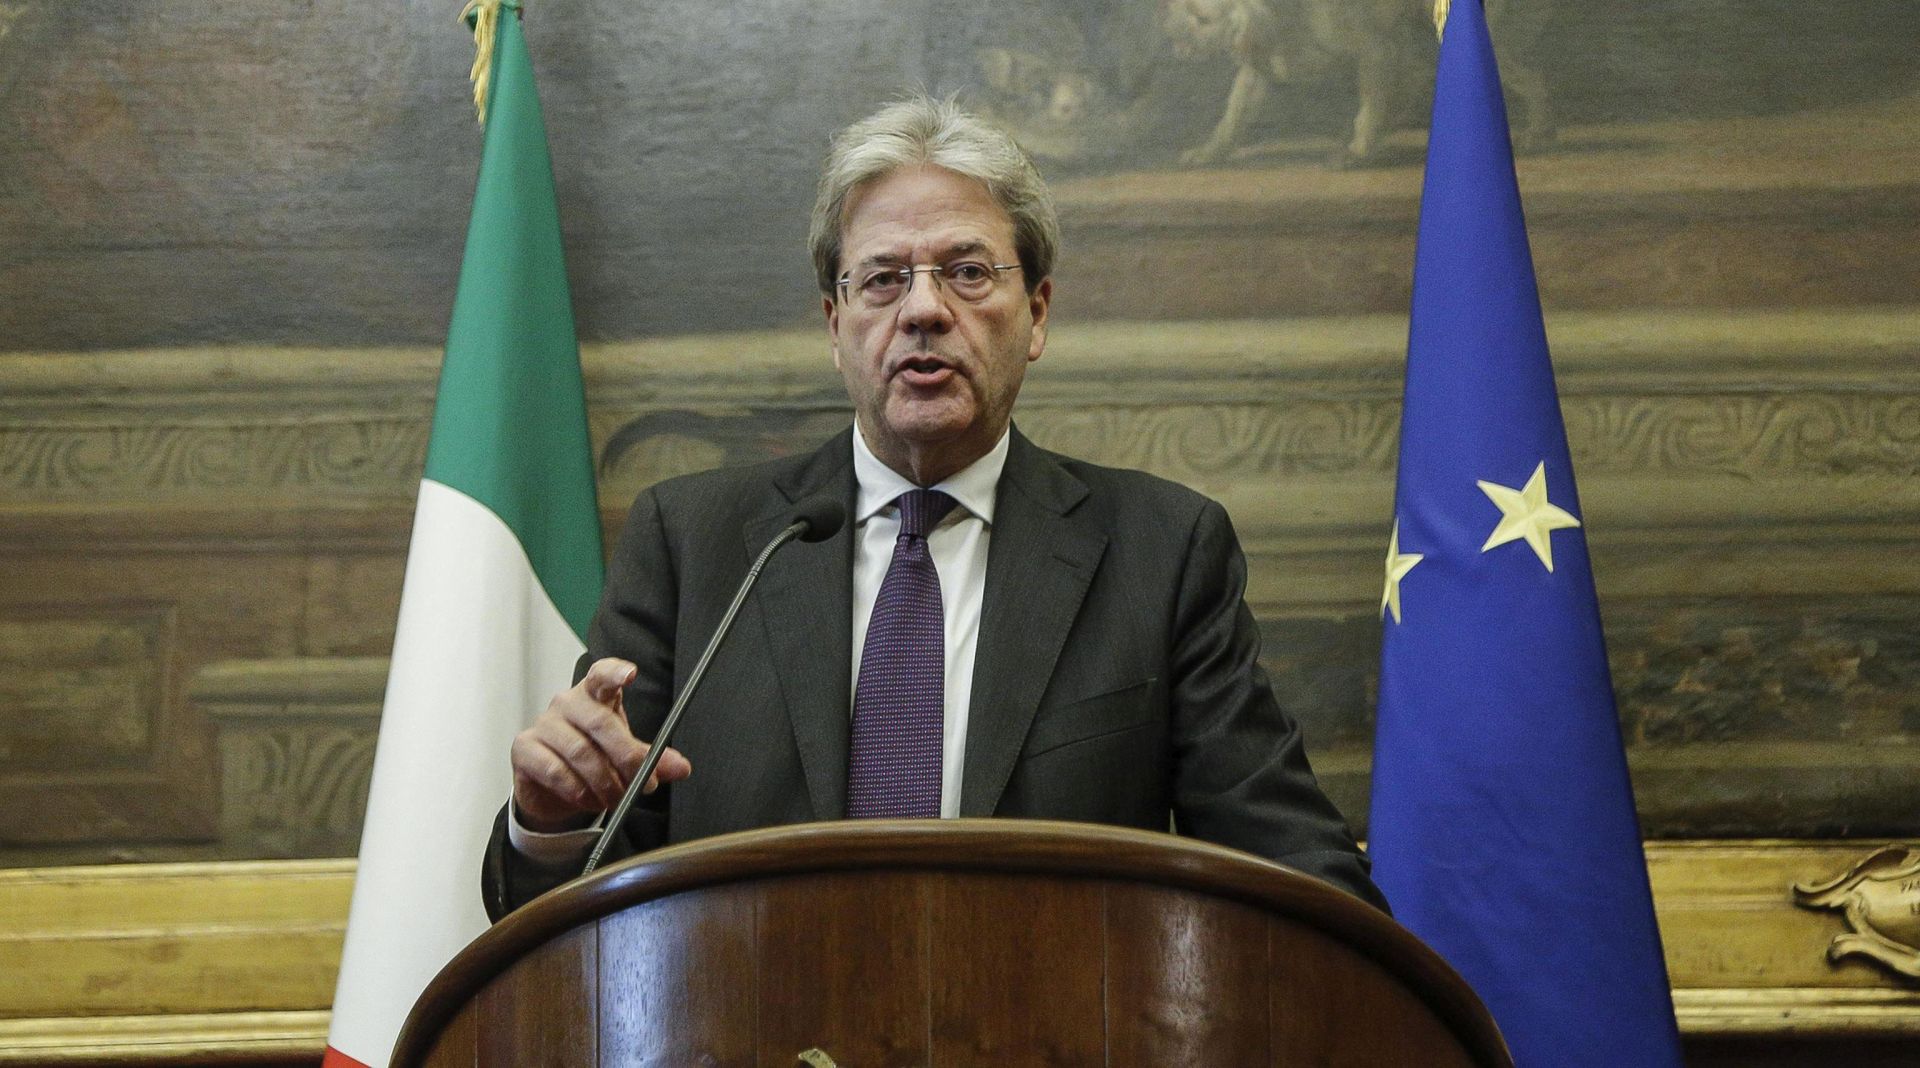 epa05672544 Italian Prime Minister in charge Paolo Gentiloni speaks after the end of his talks with parties, Rome, Italy, 12 December 2016. Italian Premier-designate will present his new cabinet later in the day. President Sergio Mattarella on 11 December gave the former foreign minister a mandate to form a new government in the wake of Matteo Renzi's resignation as premier last week, following a crushing defeat in a 04 December constitutional referendum.  EPA/GIUSEPPE LAMI